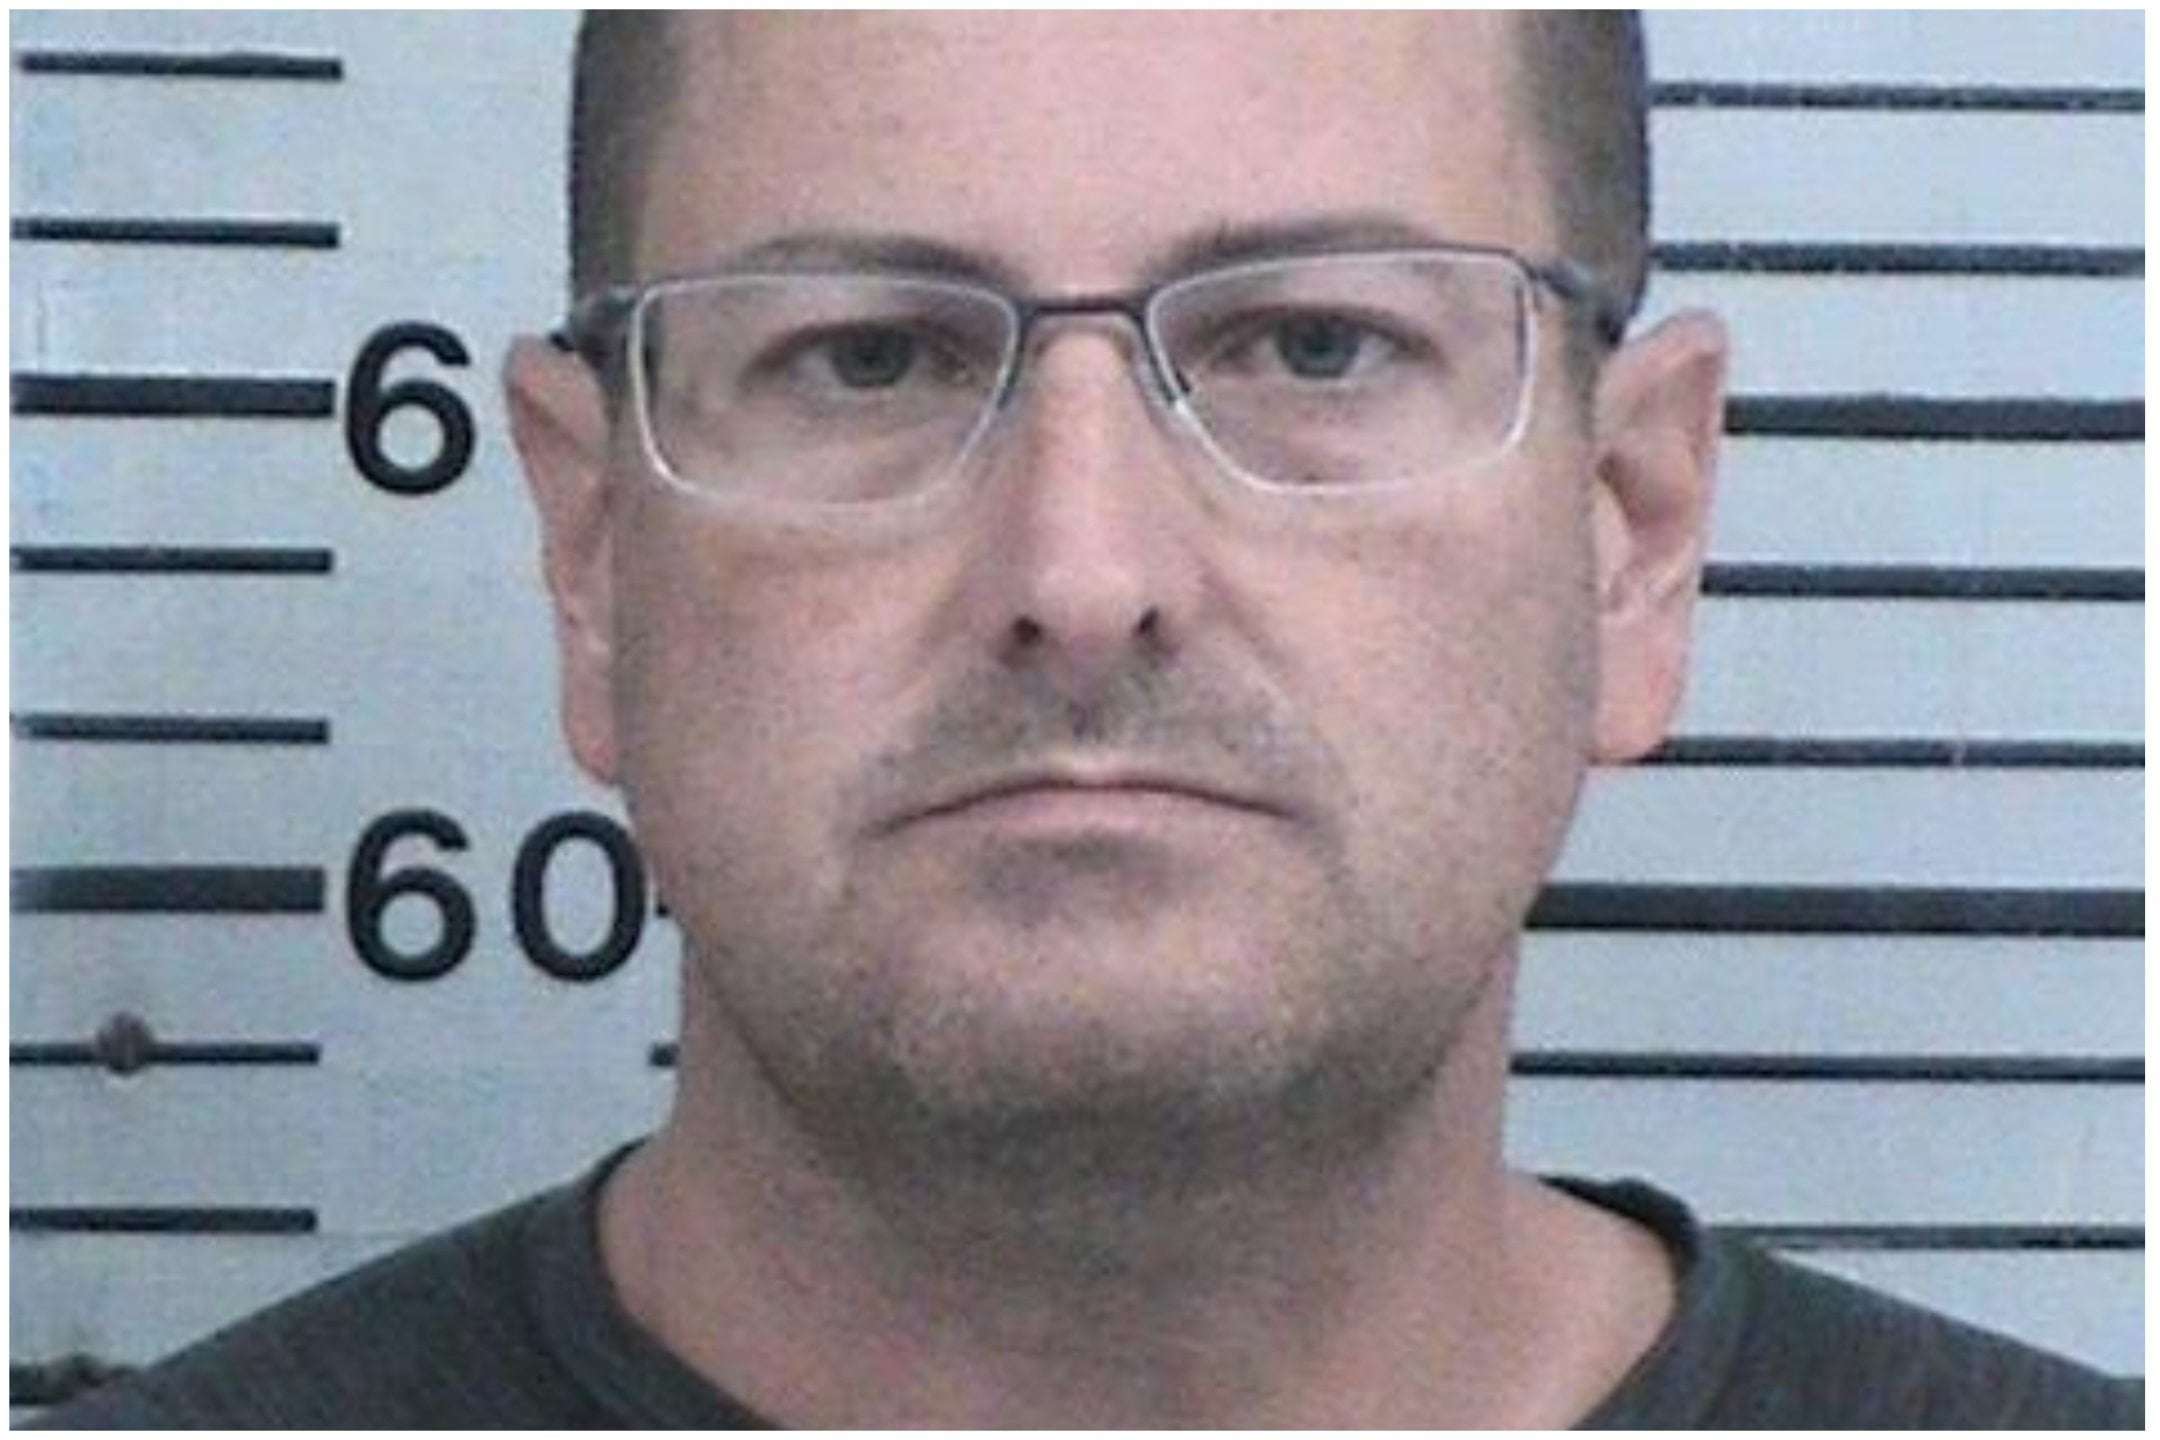 image for Republican Candidate Charged With Child Porn Offenses Hours Before Election